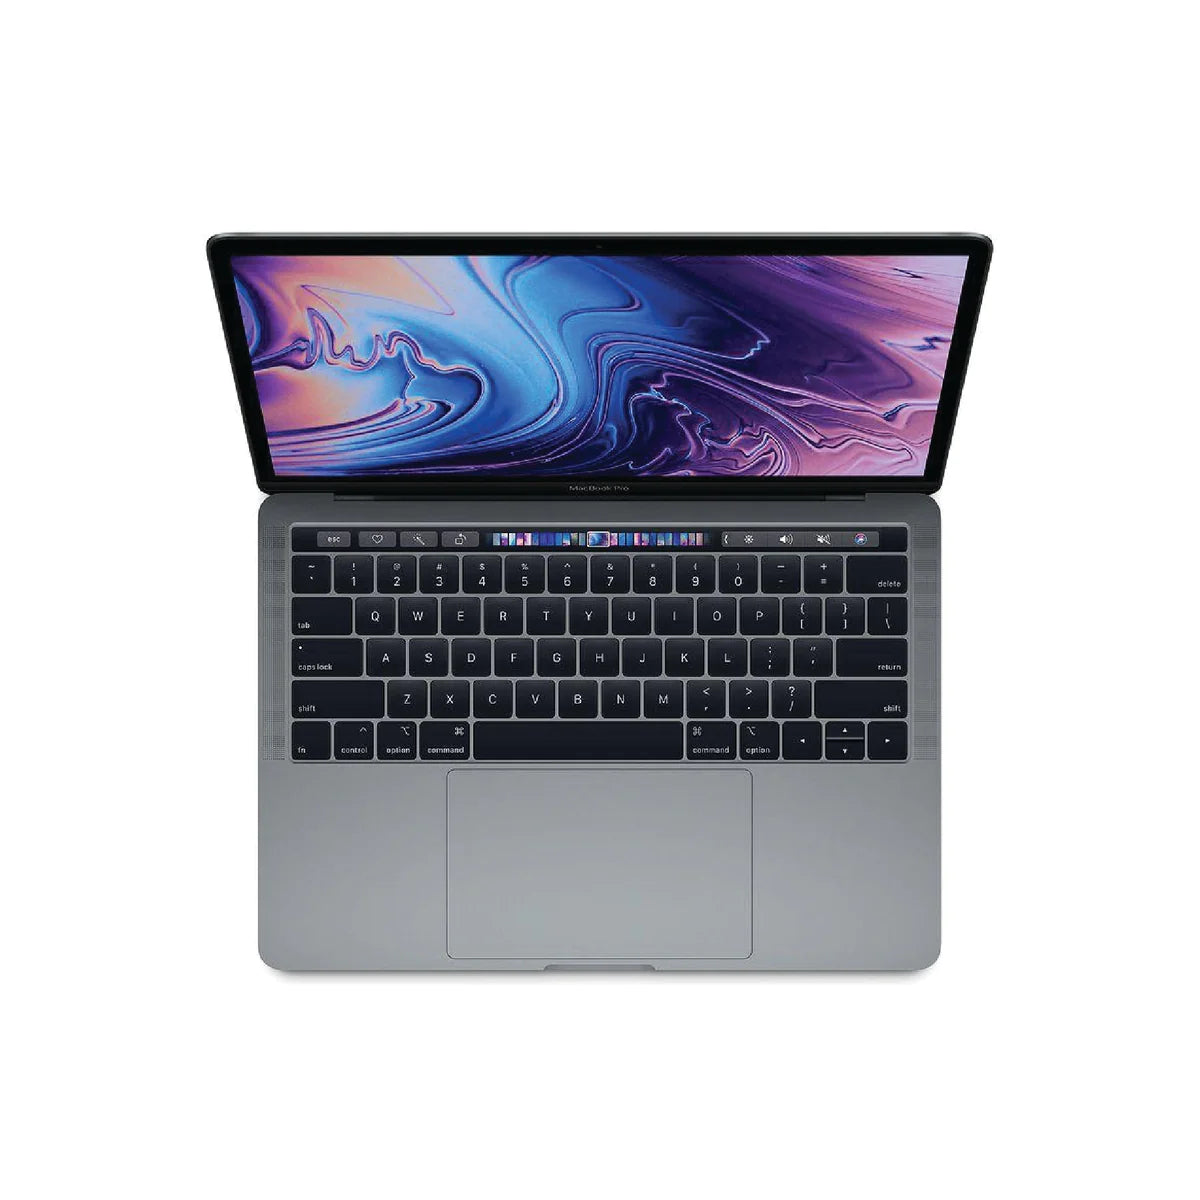 MacBook Pro (13-inch, 2019, Two Thunderbolt 3 ports) 1.4GHz, Intel Cor